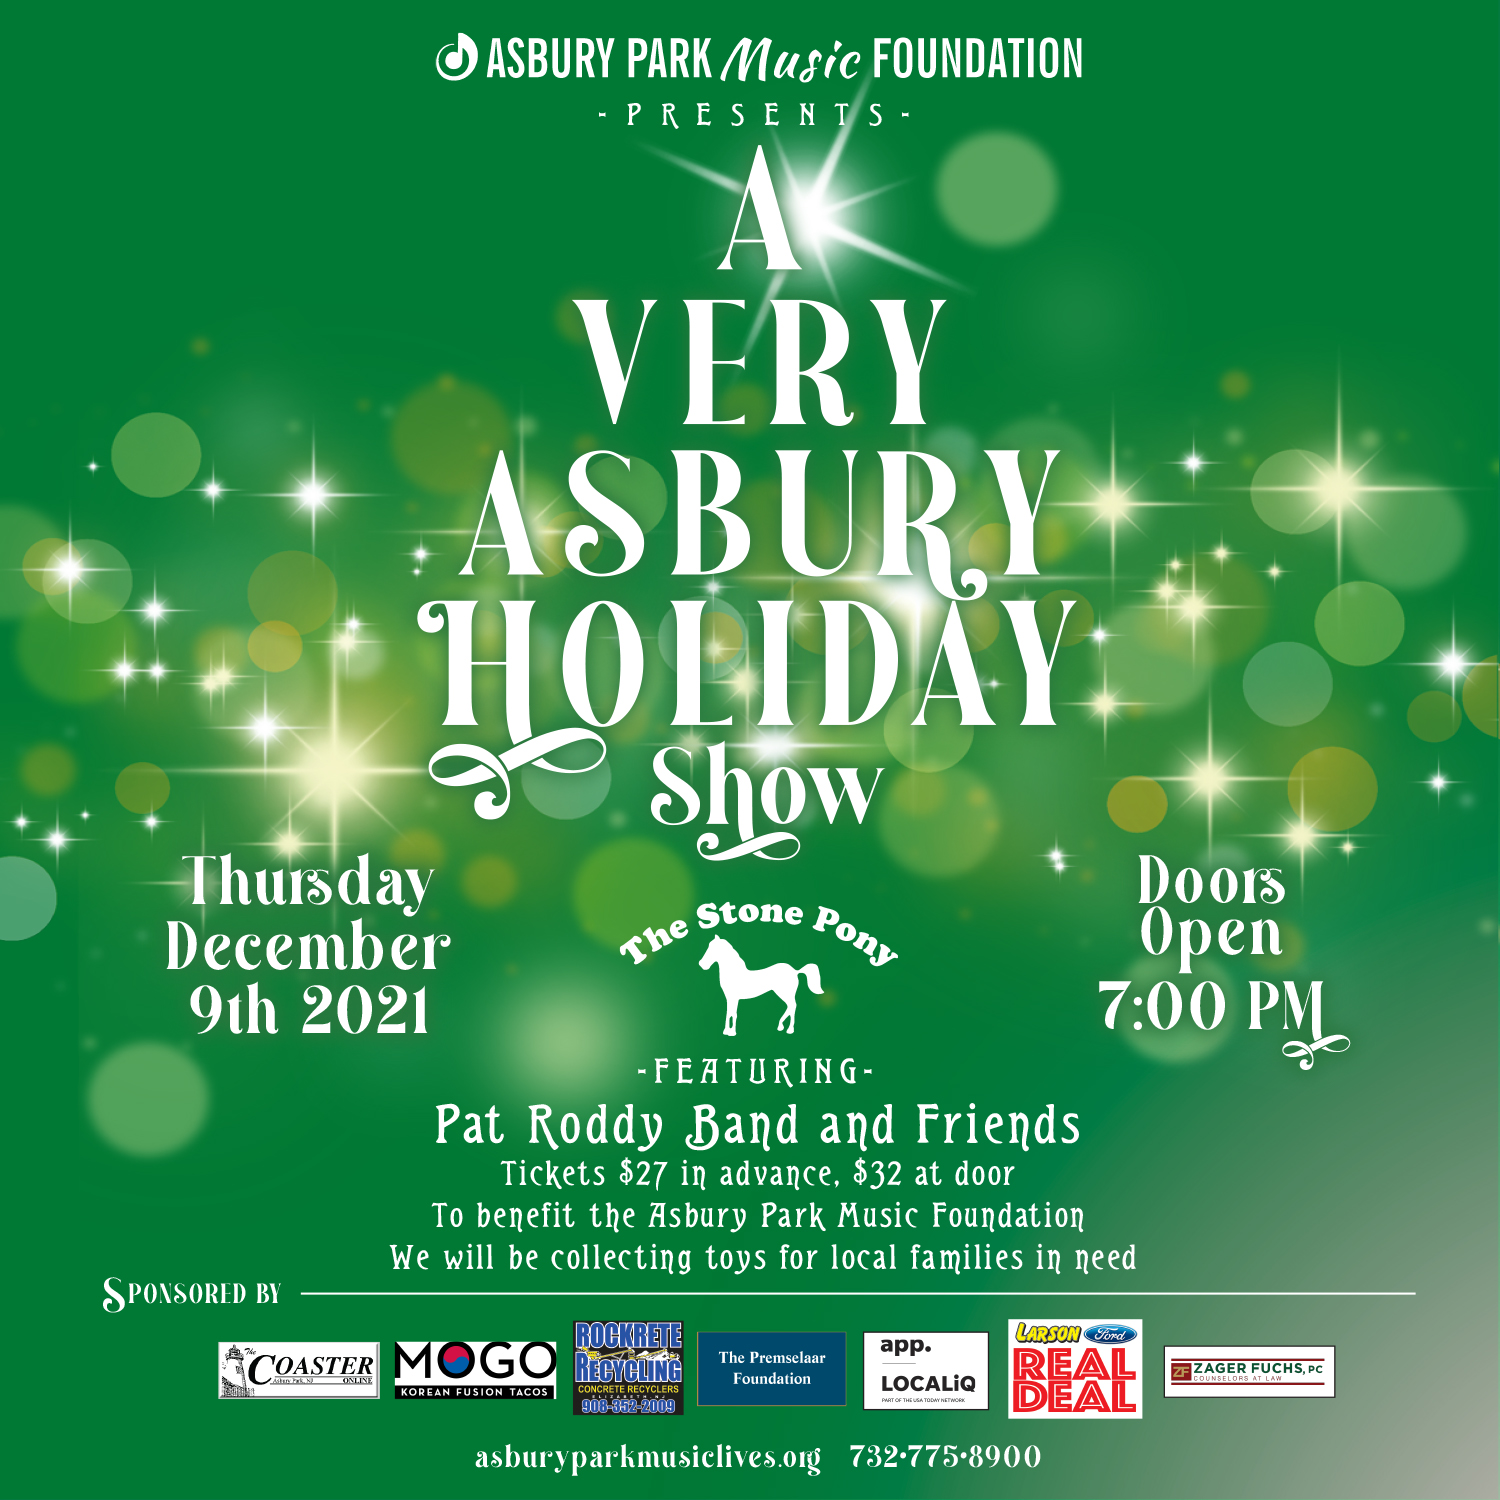 Roddy Band to headline the 3rd Annual “A Very Asbury Holiday Show”.